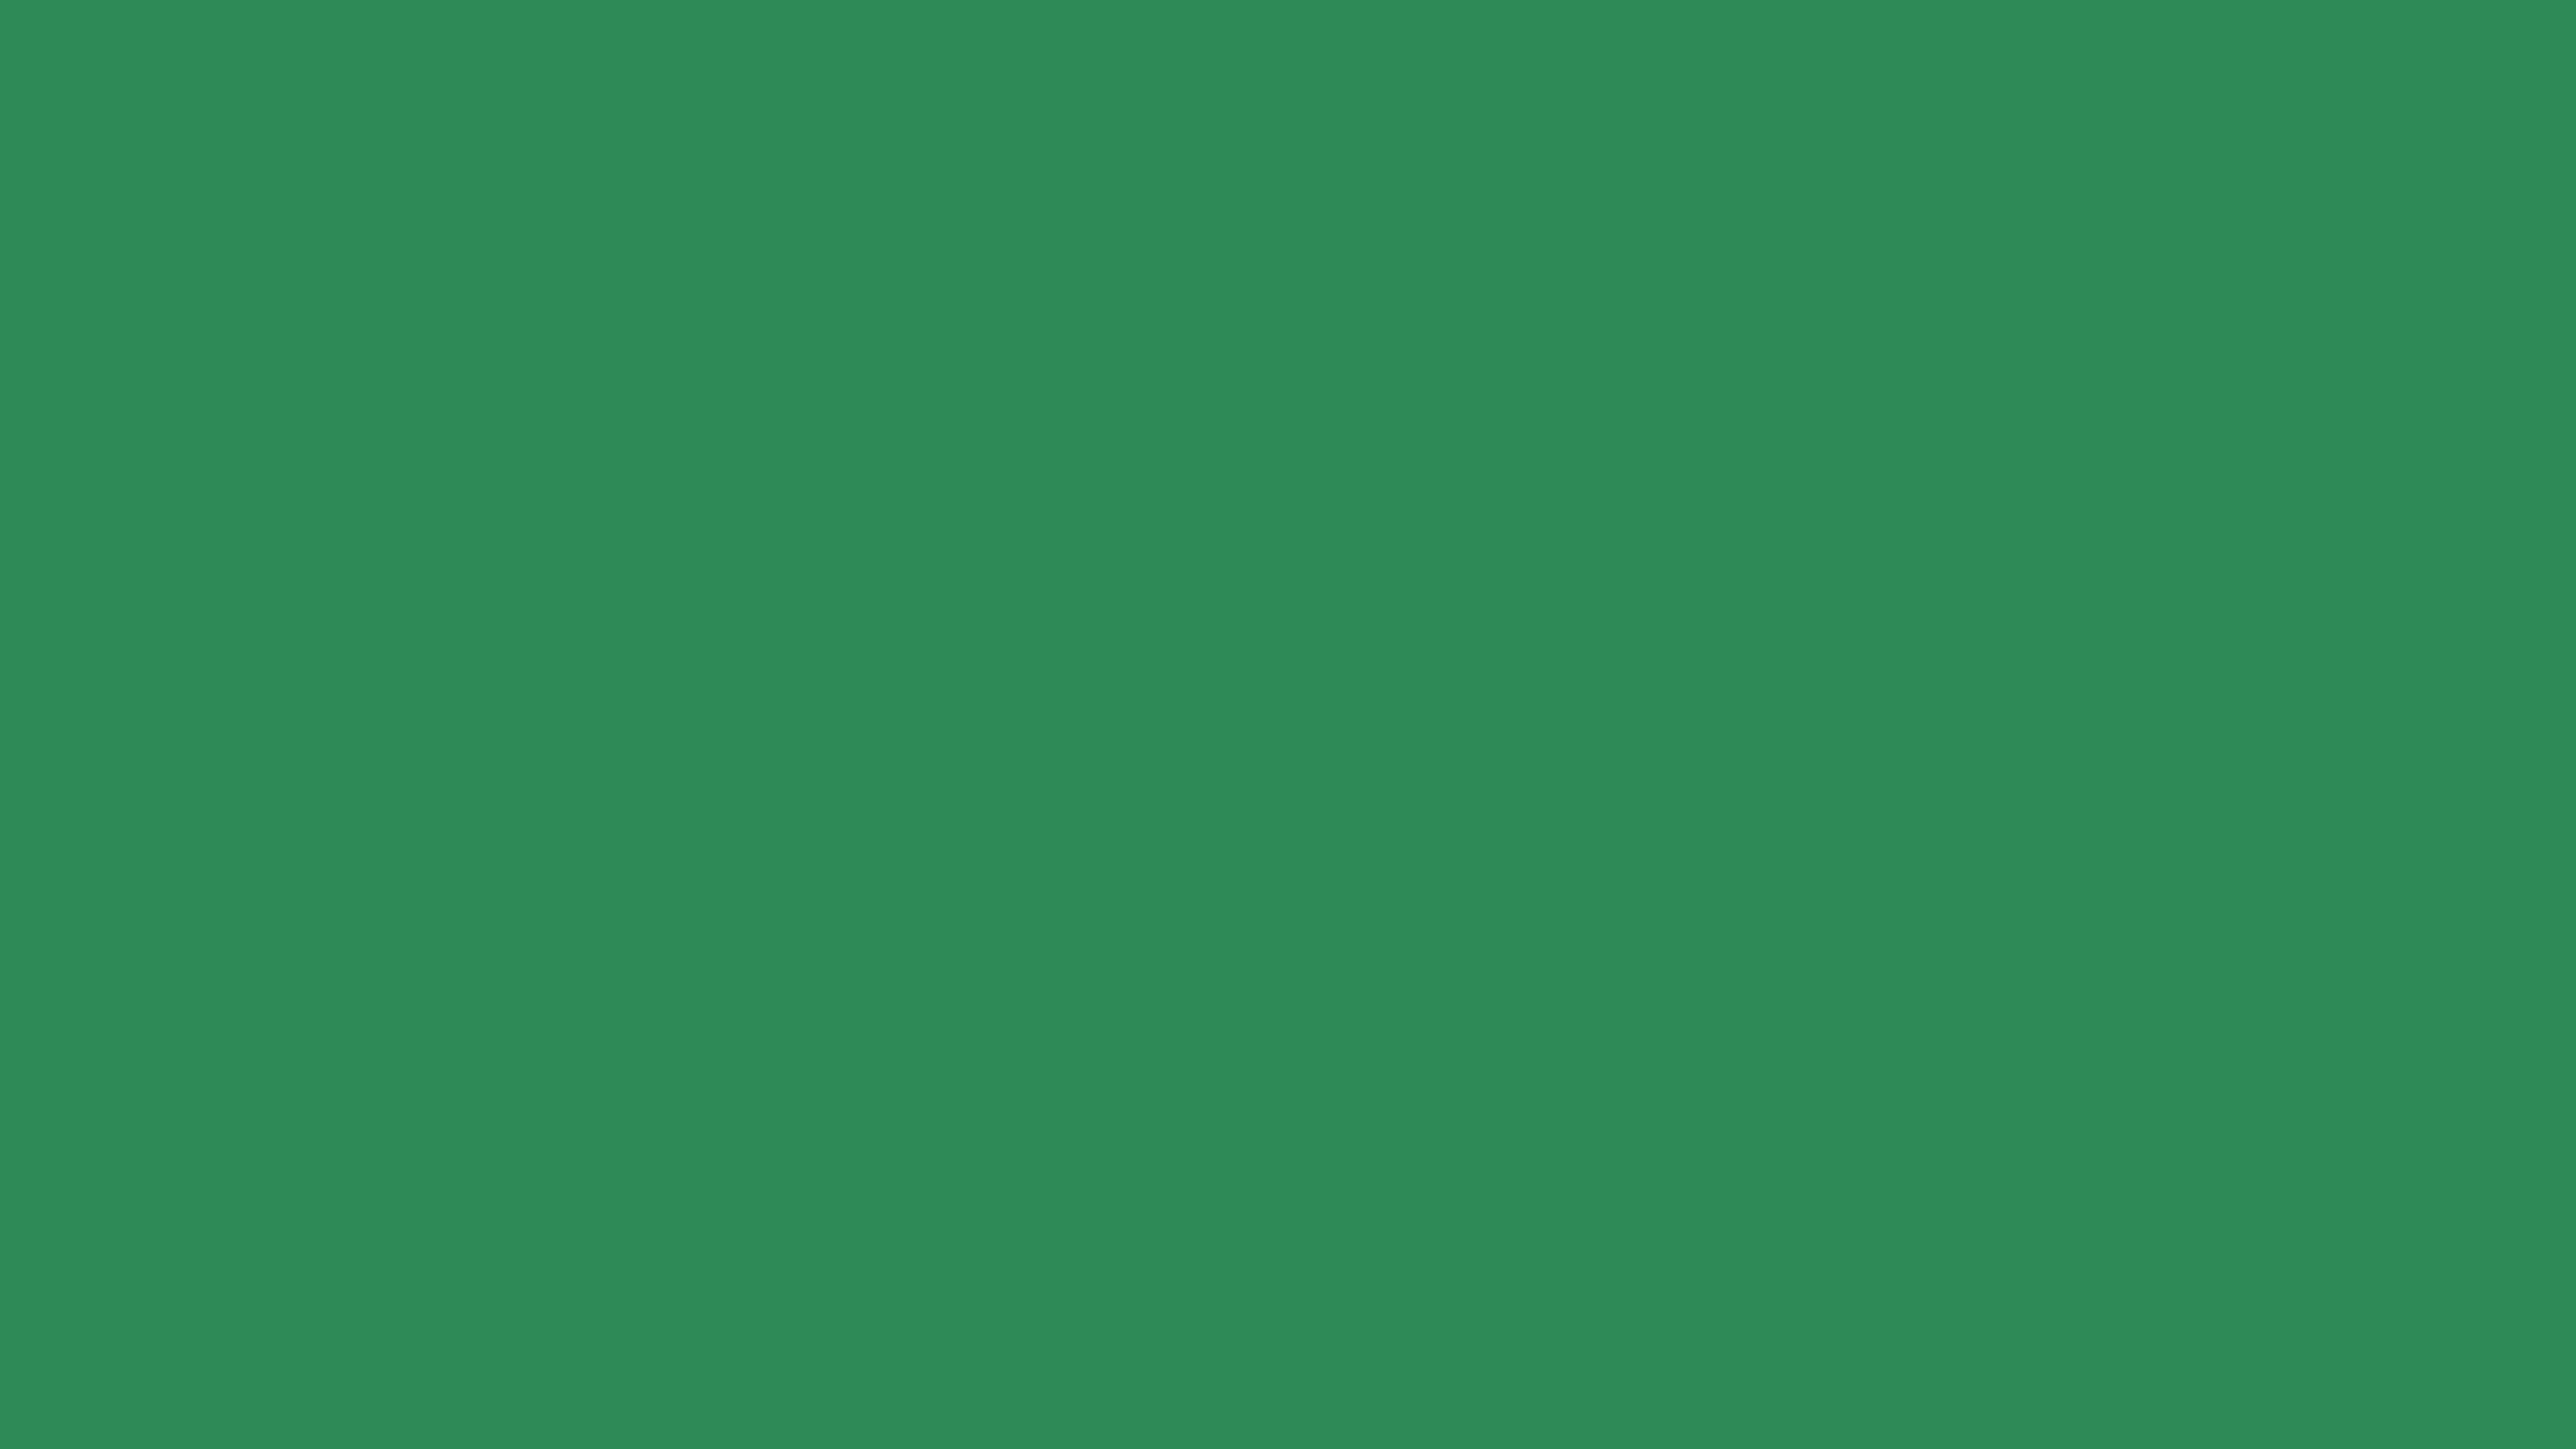 4096x2304 Sea Green Solid Color Background